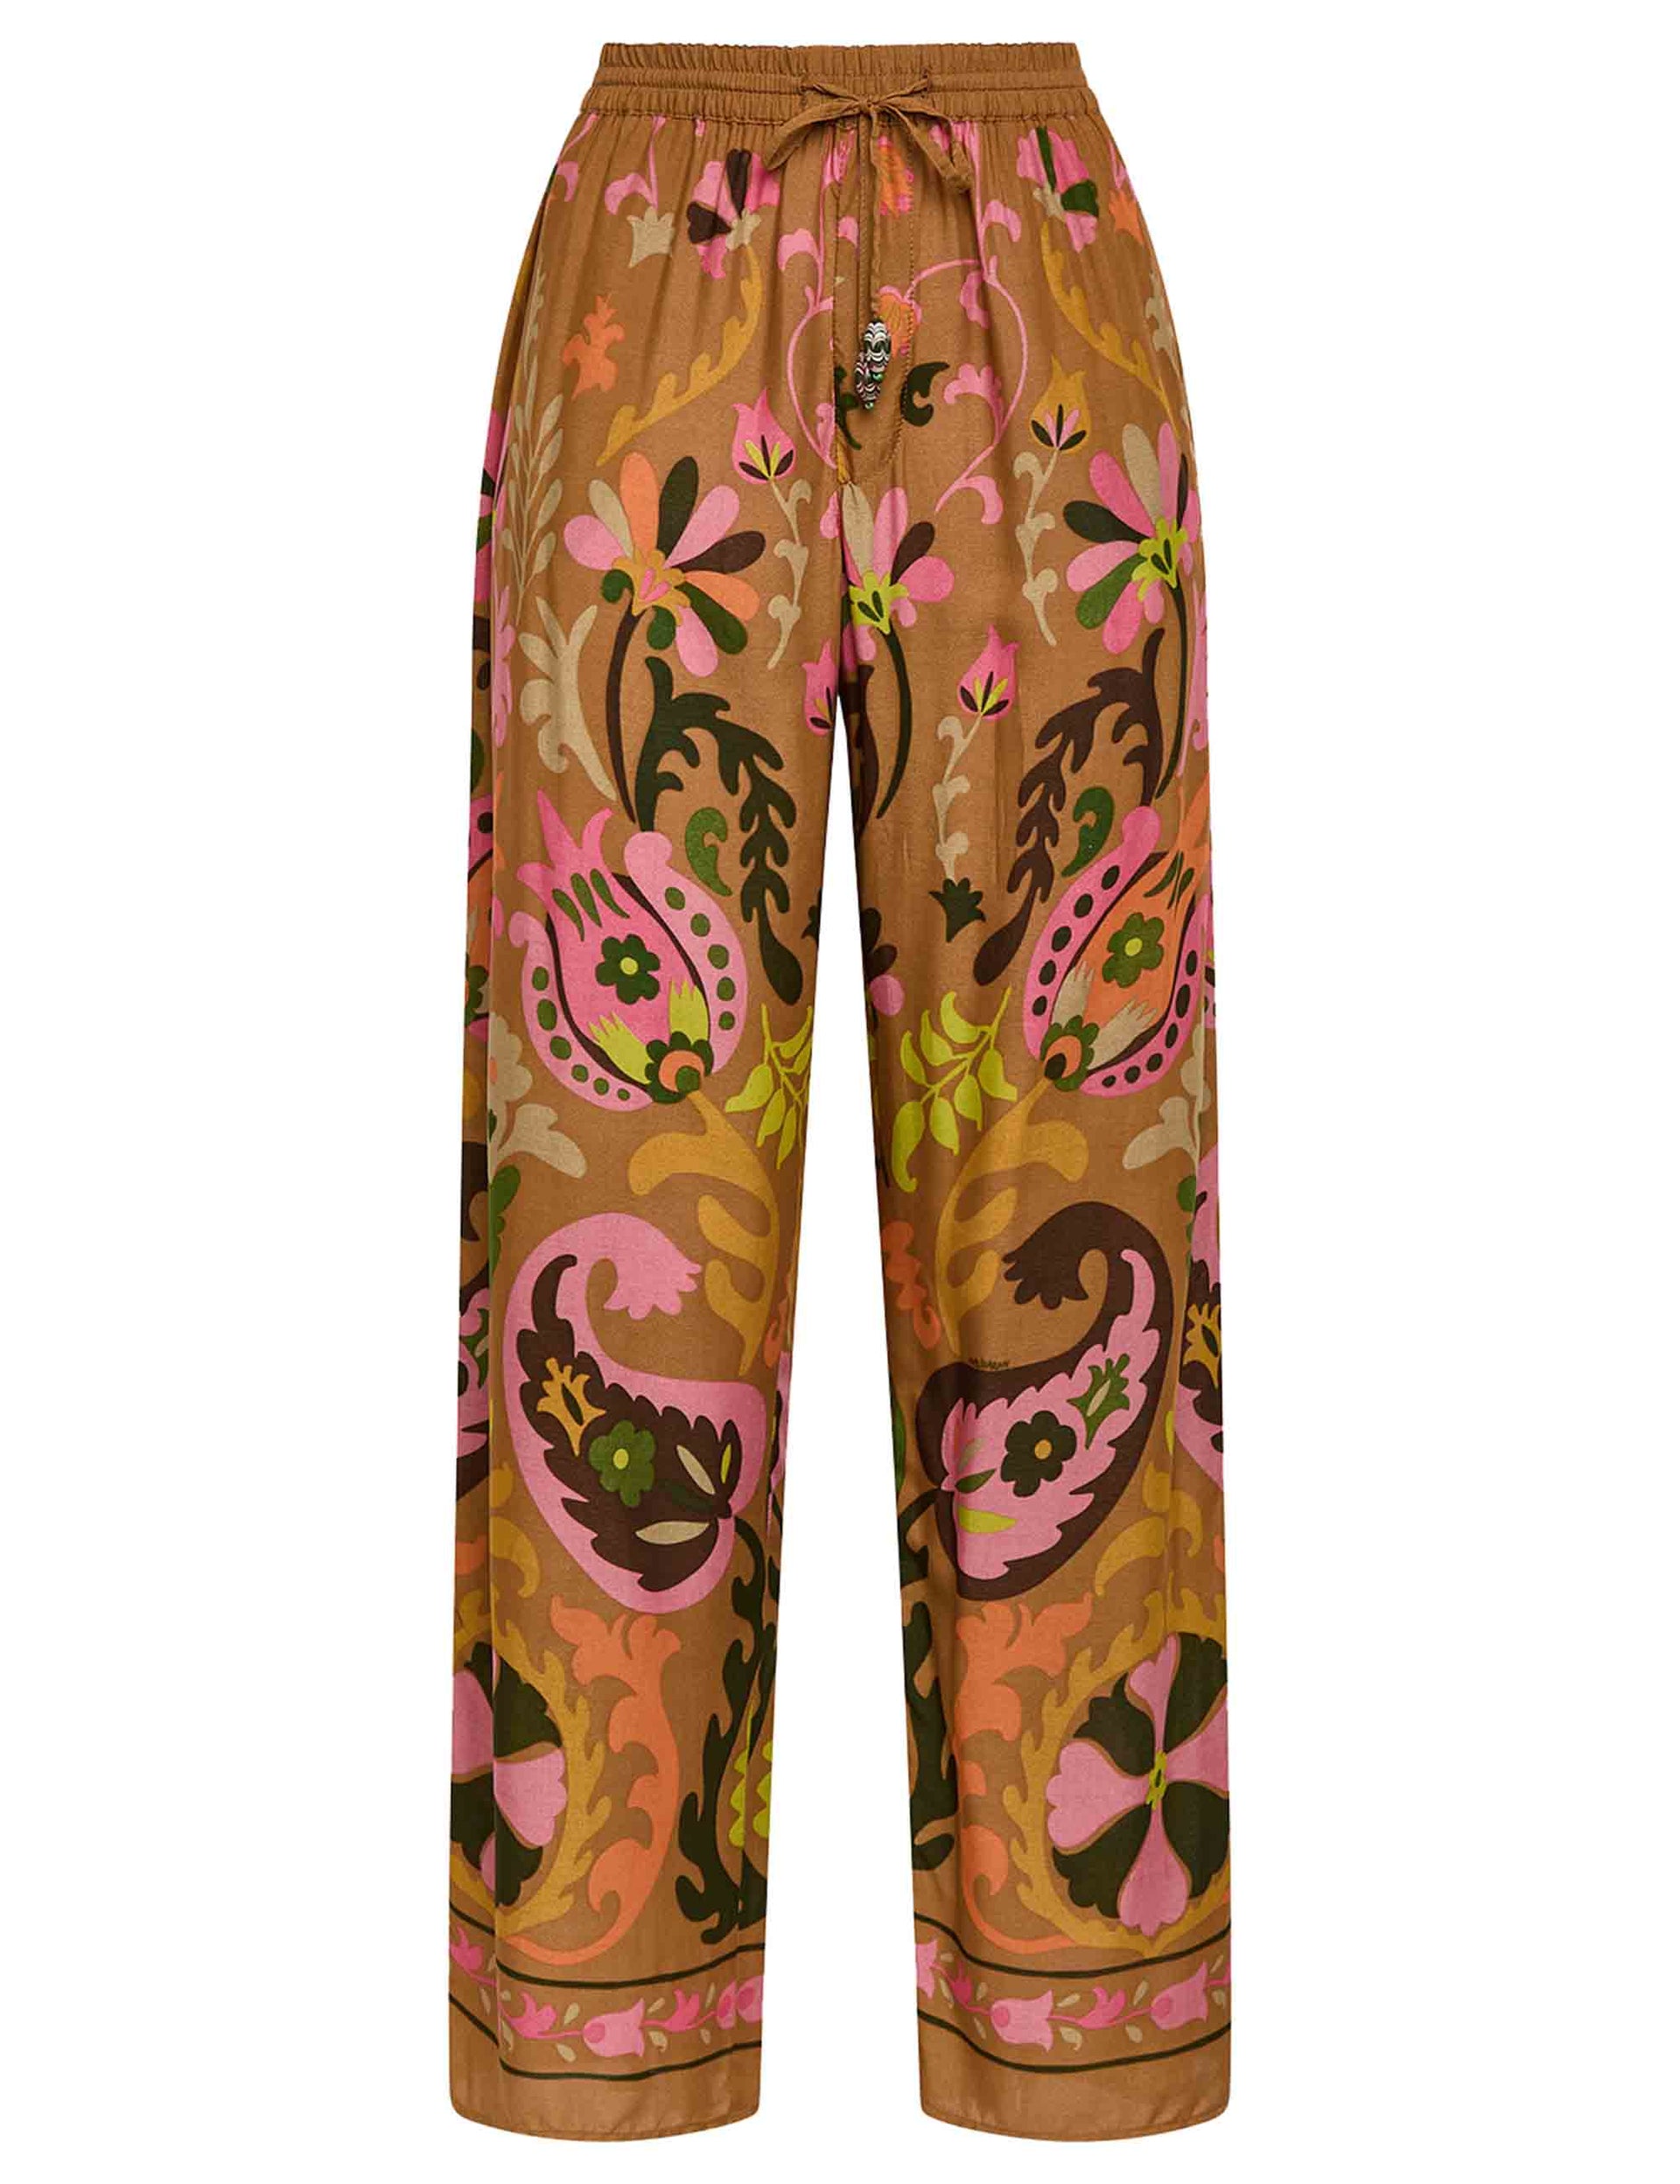 Fortuna Print women's trousers in natural brown viscose with soft leg